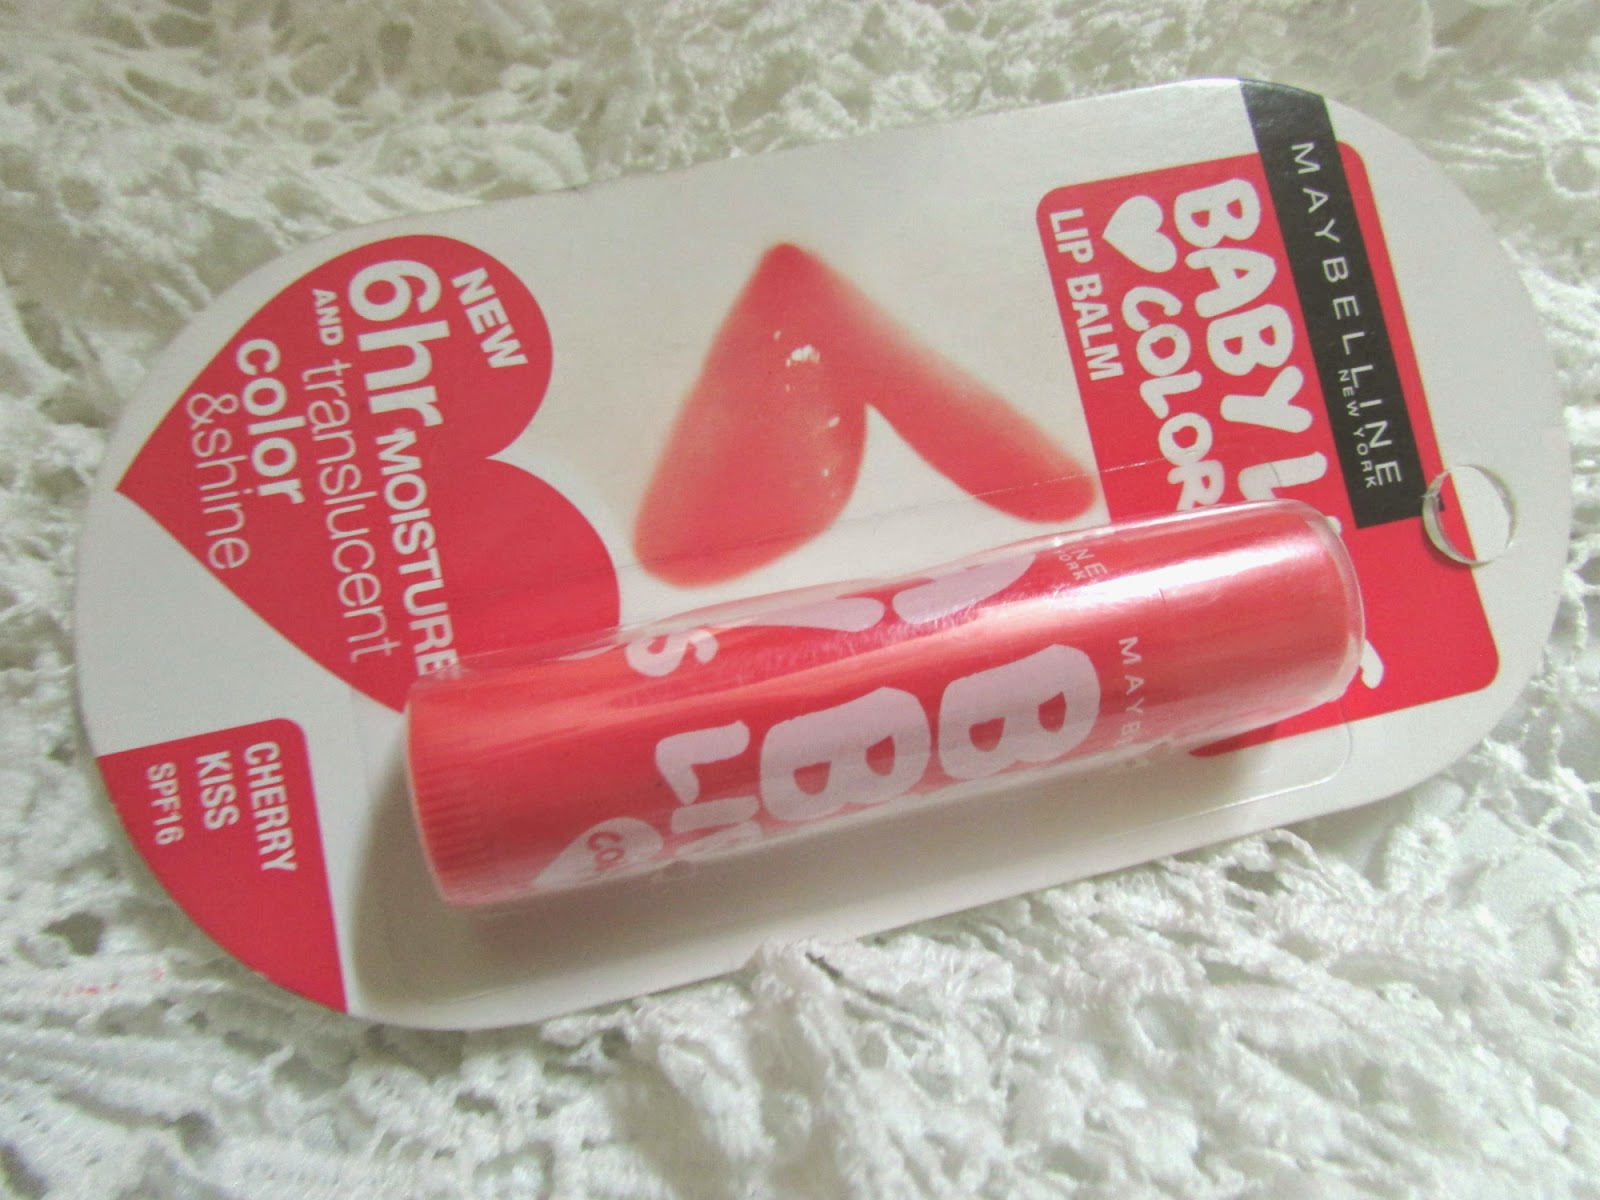 Baby lips in india,maybelline baby lips cost in india,maybelline baby lips review,maybelline baby lips review india